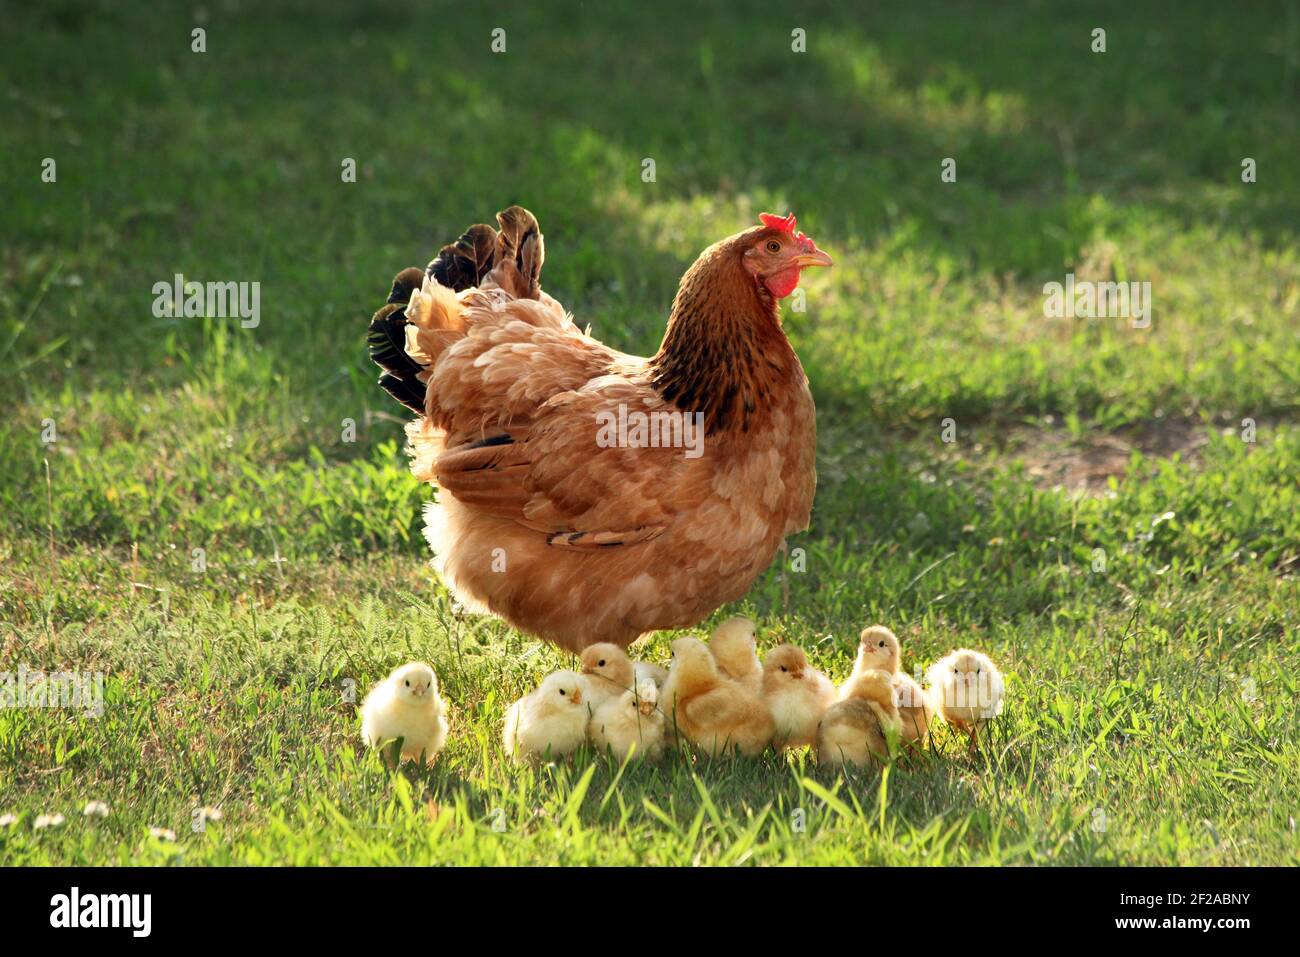 Mother hen with chickens in a rural yard.Chickens in a grass in the village against sun photos.Gallus gallus domesticus.Poultry organic farm.Sustainab Stock Photo